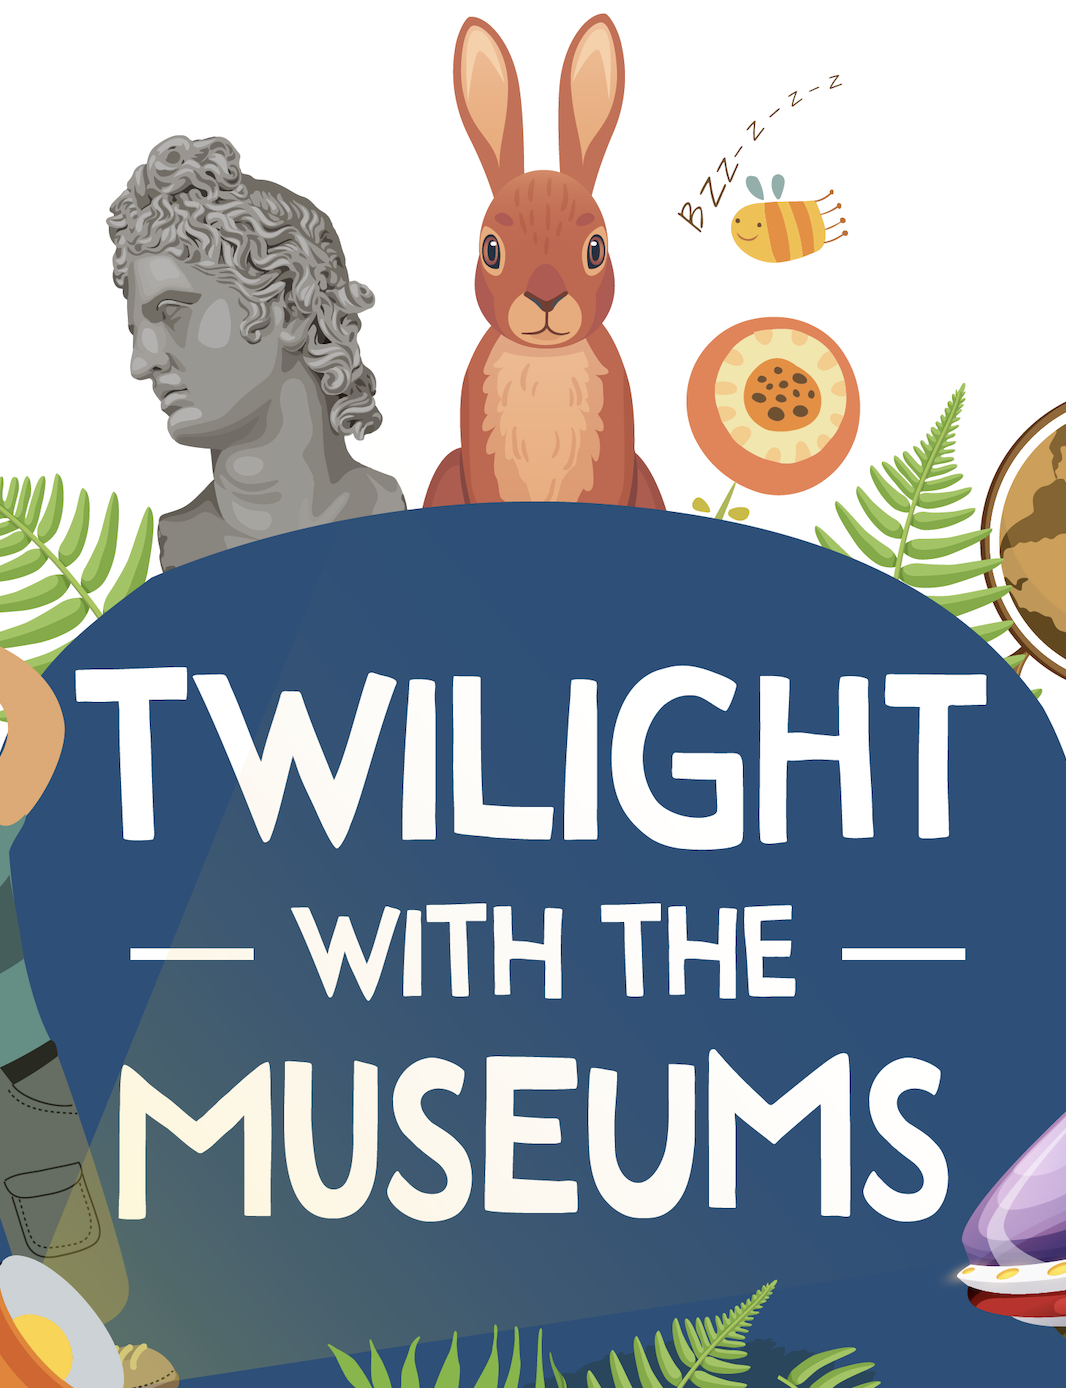 'Twilight with the Museums' banner, with illustrations of children and families enjoying activities from all over the Cambridge Museums and leaves interspersed. 